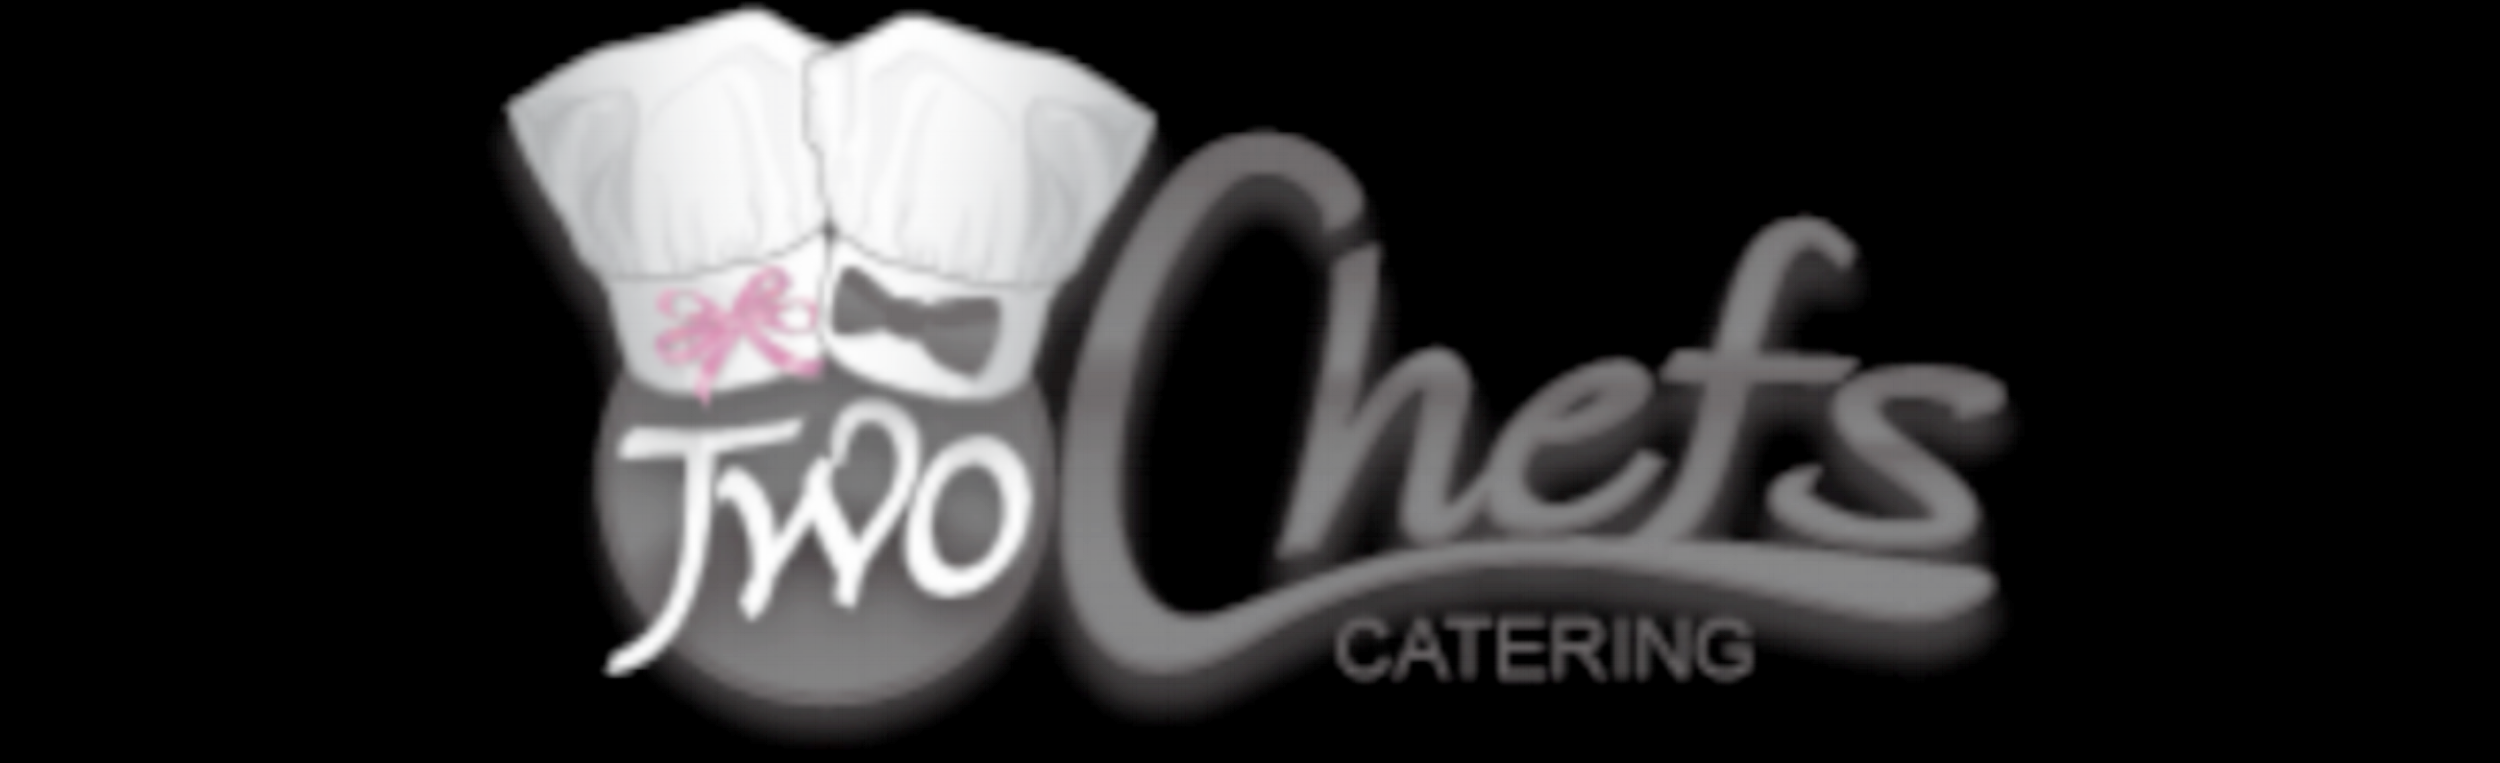 Two Chefs Catering